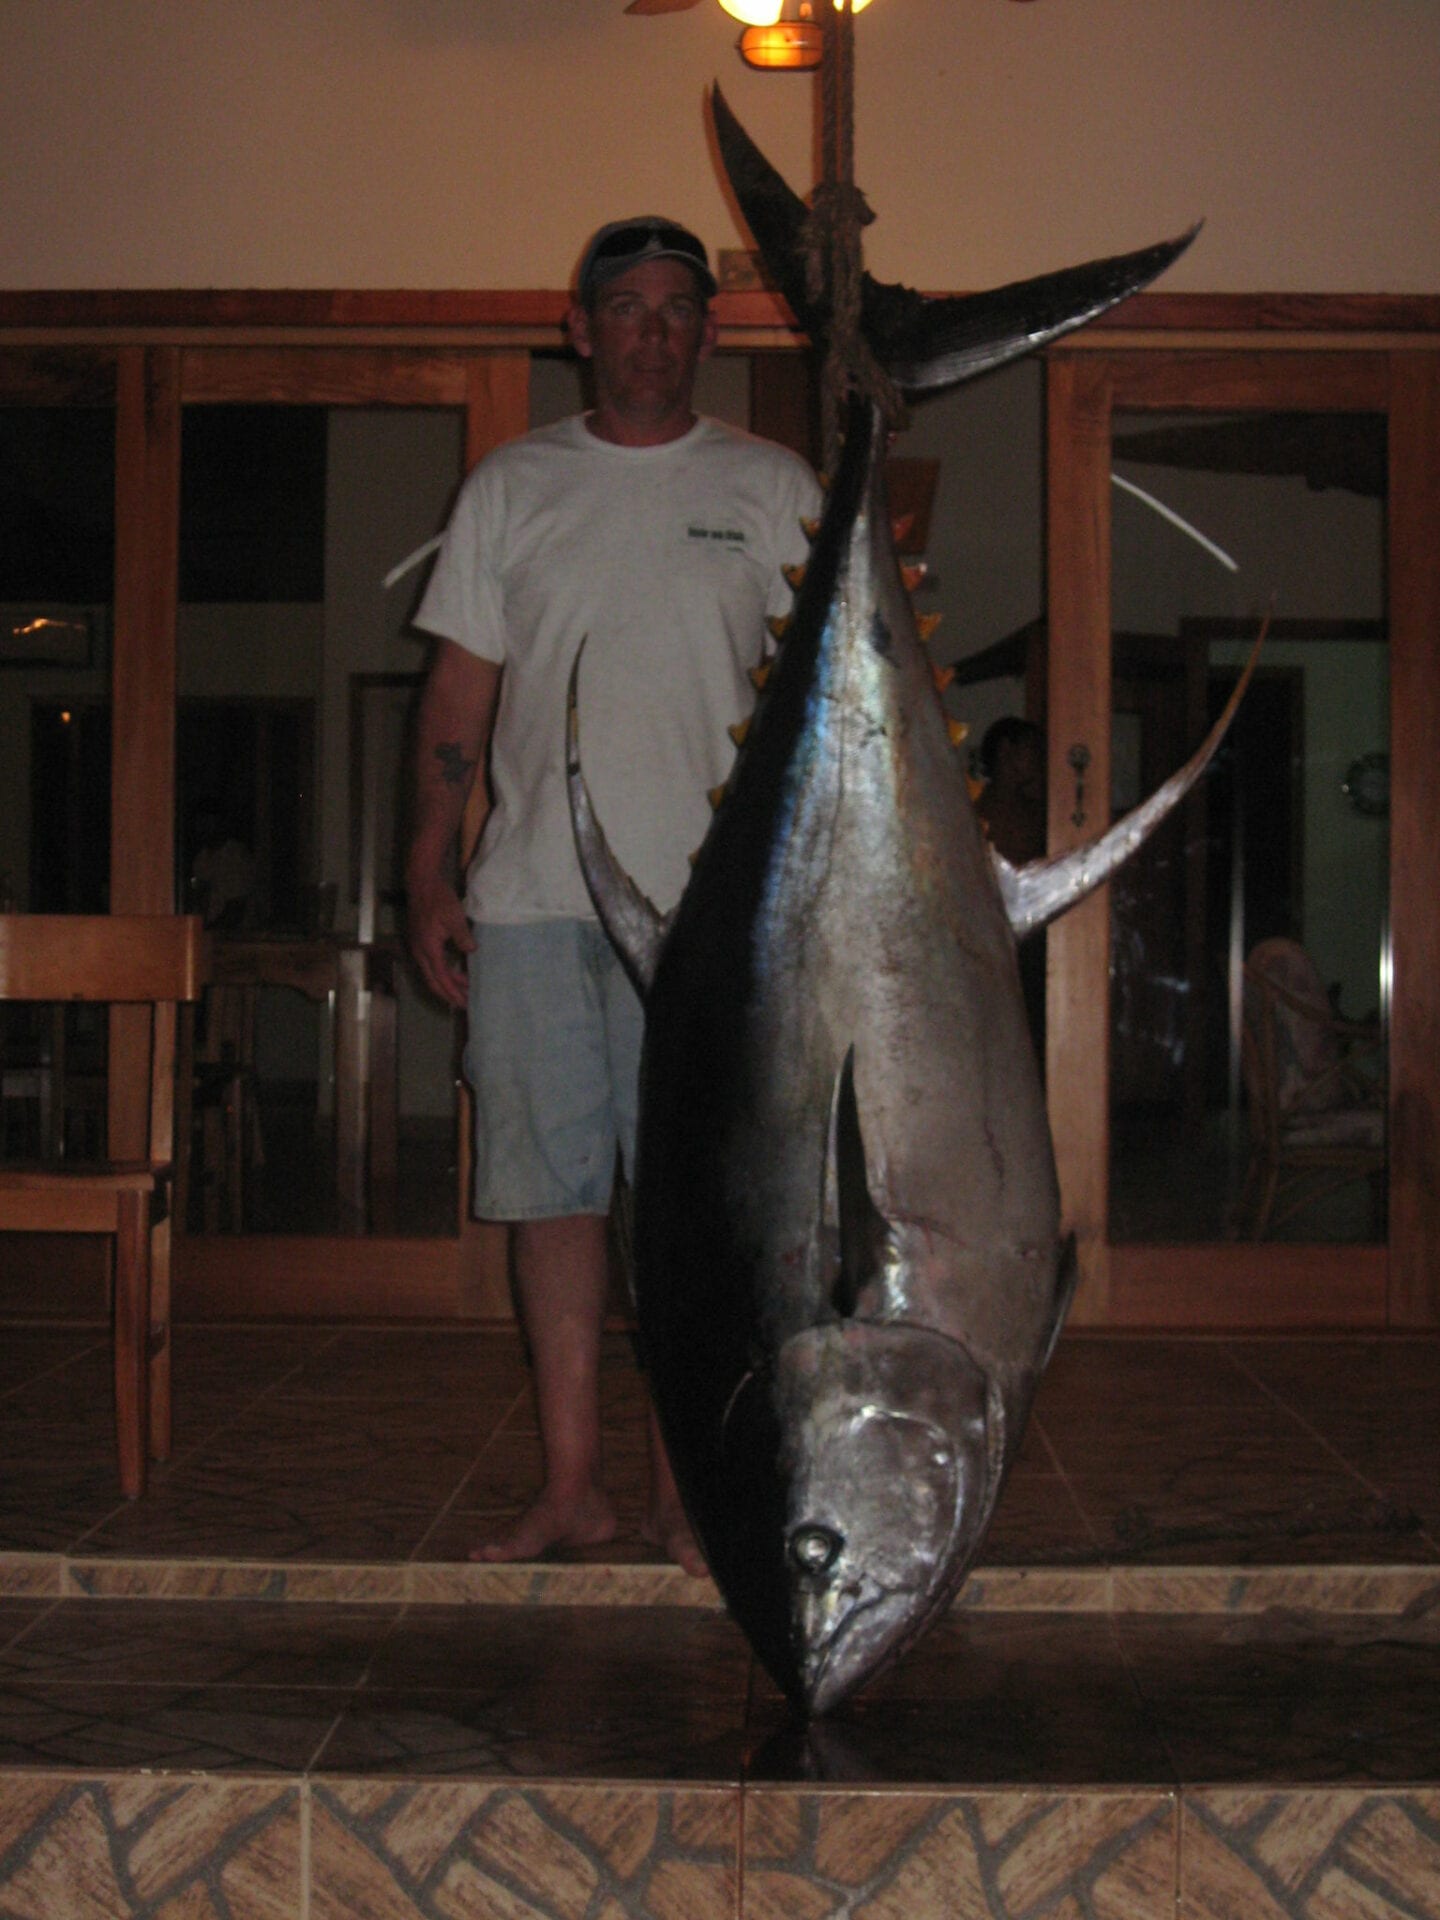 A man in the front door while holding a big fish